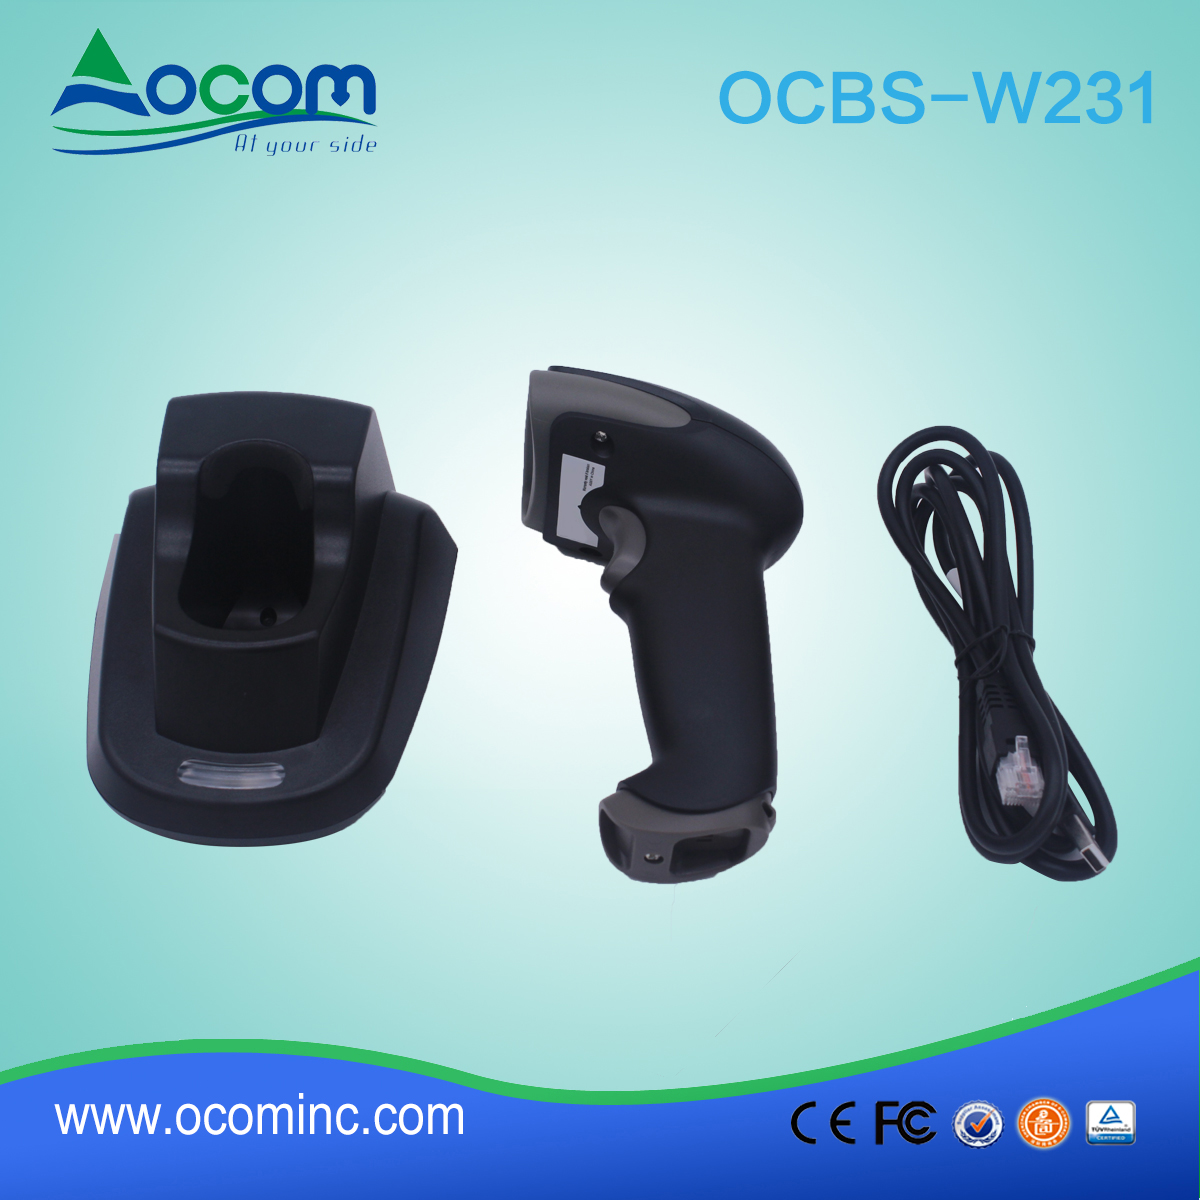 (OCBS-W231) 433Mhz 2d wireless barcode scanner with craddle for sale